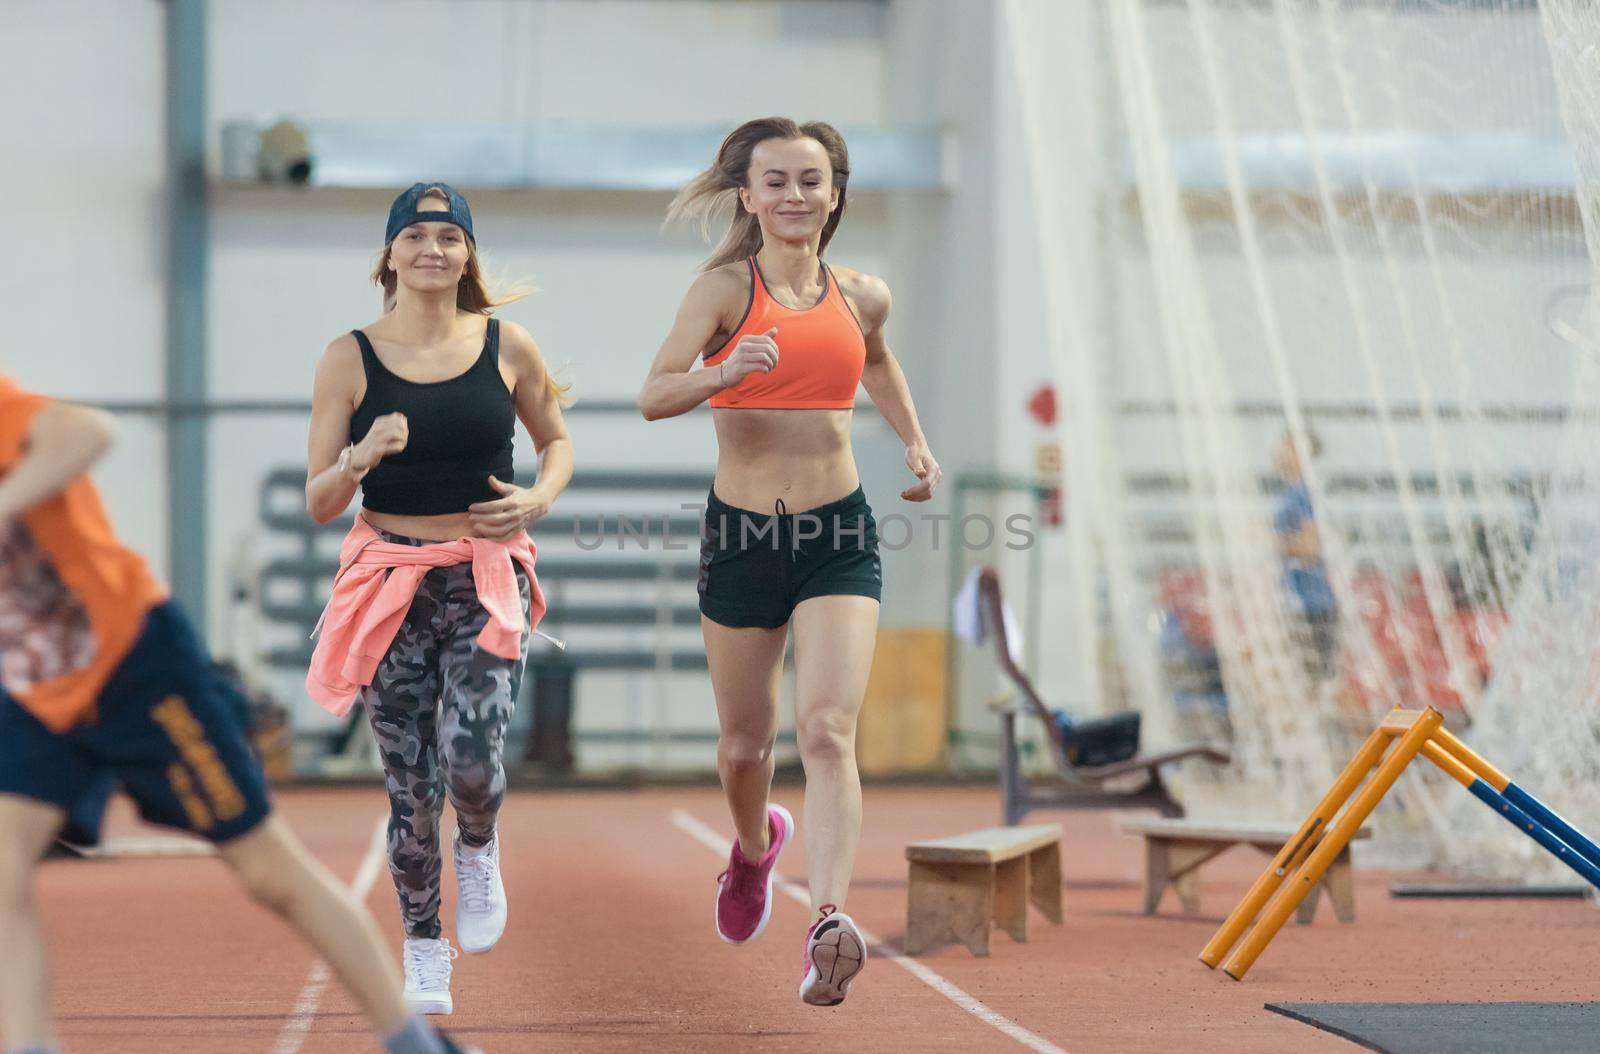 Two young athletic women running in sports arena indoors. Mid shot